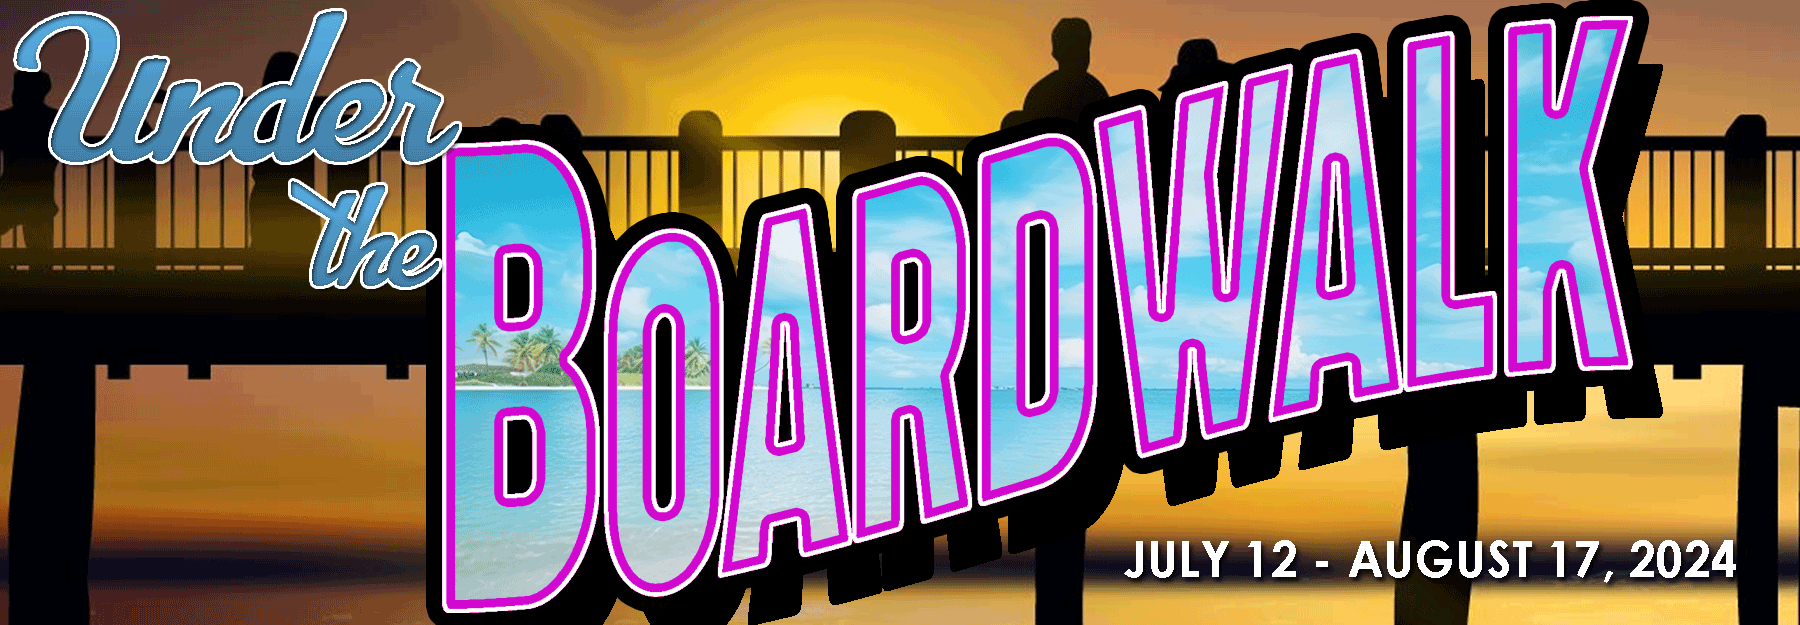 Don't miss Under the Boardwalk. Find out more here!